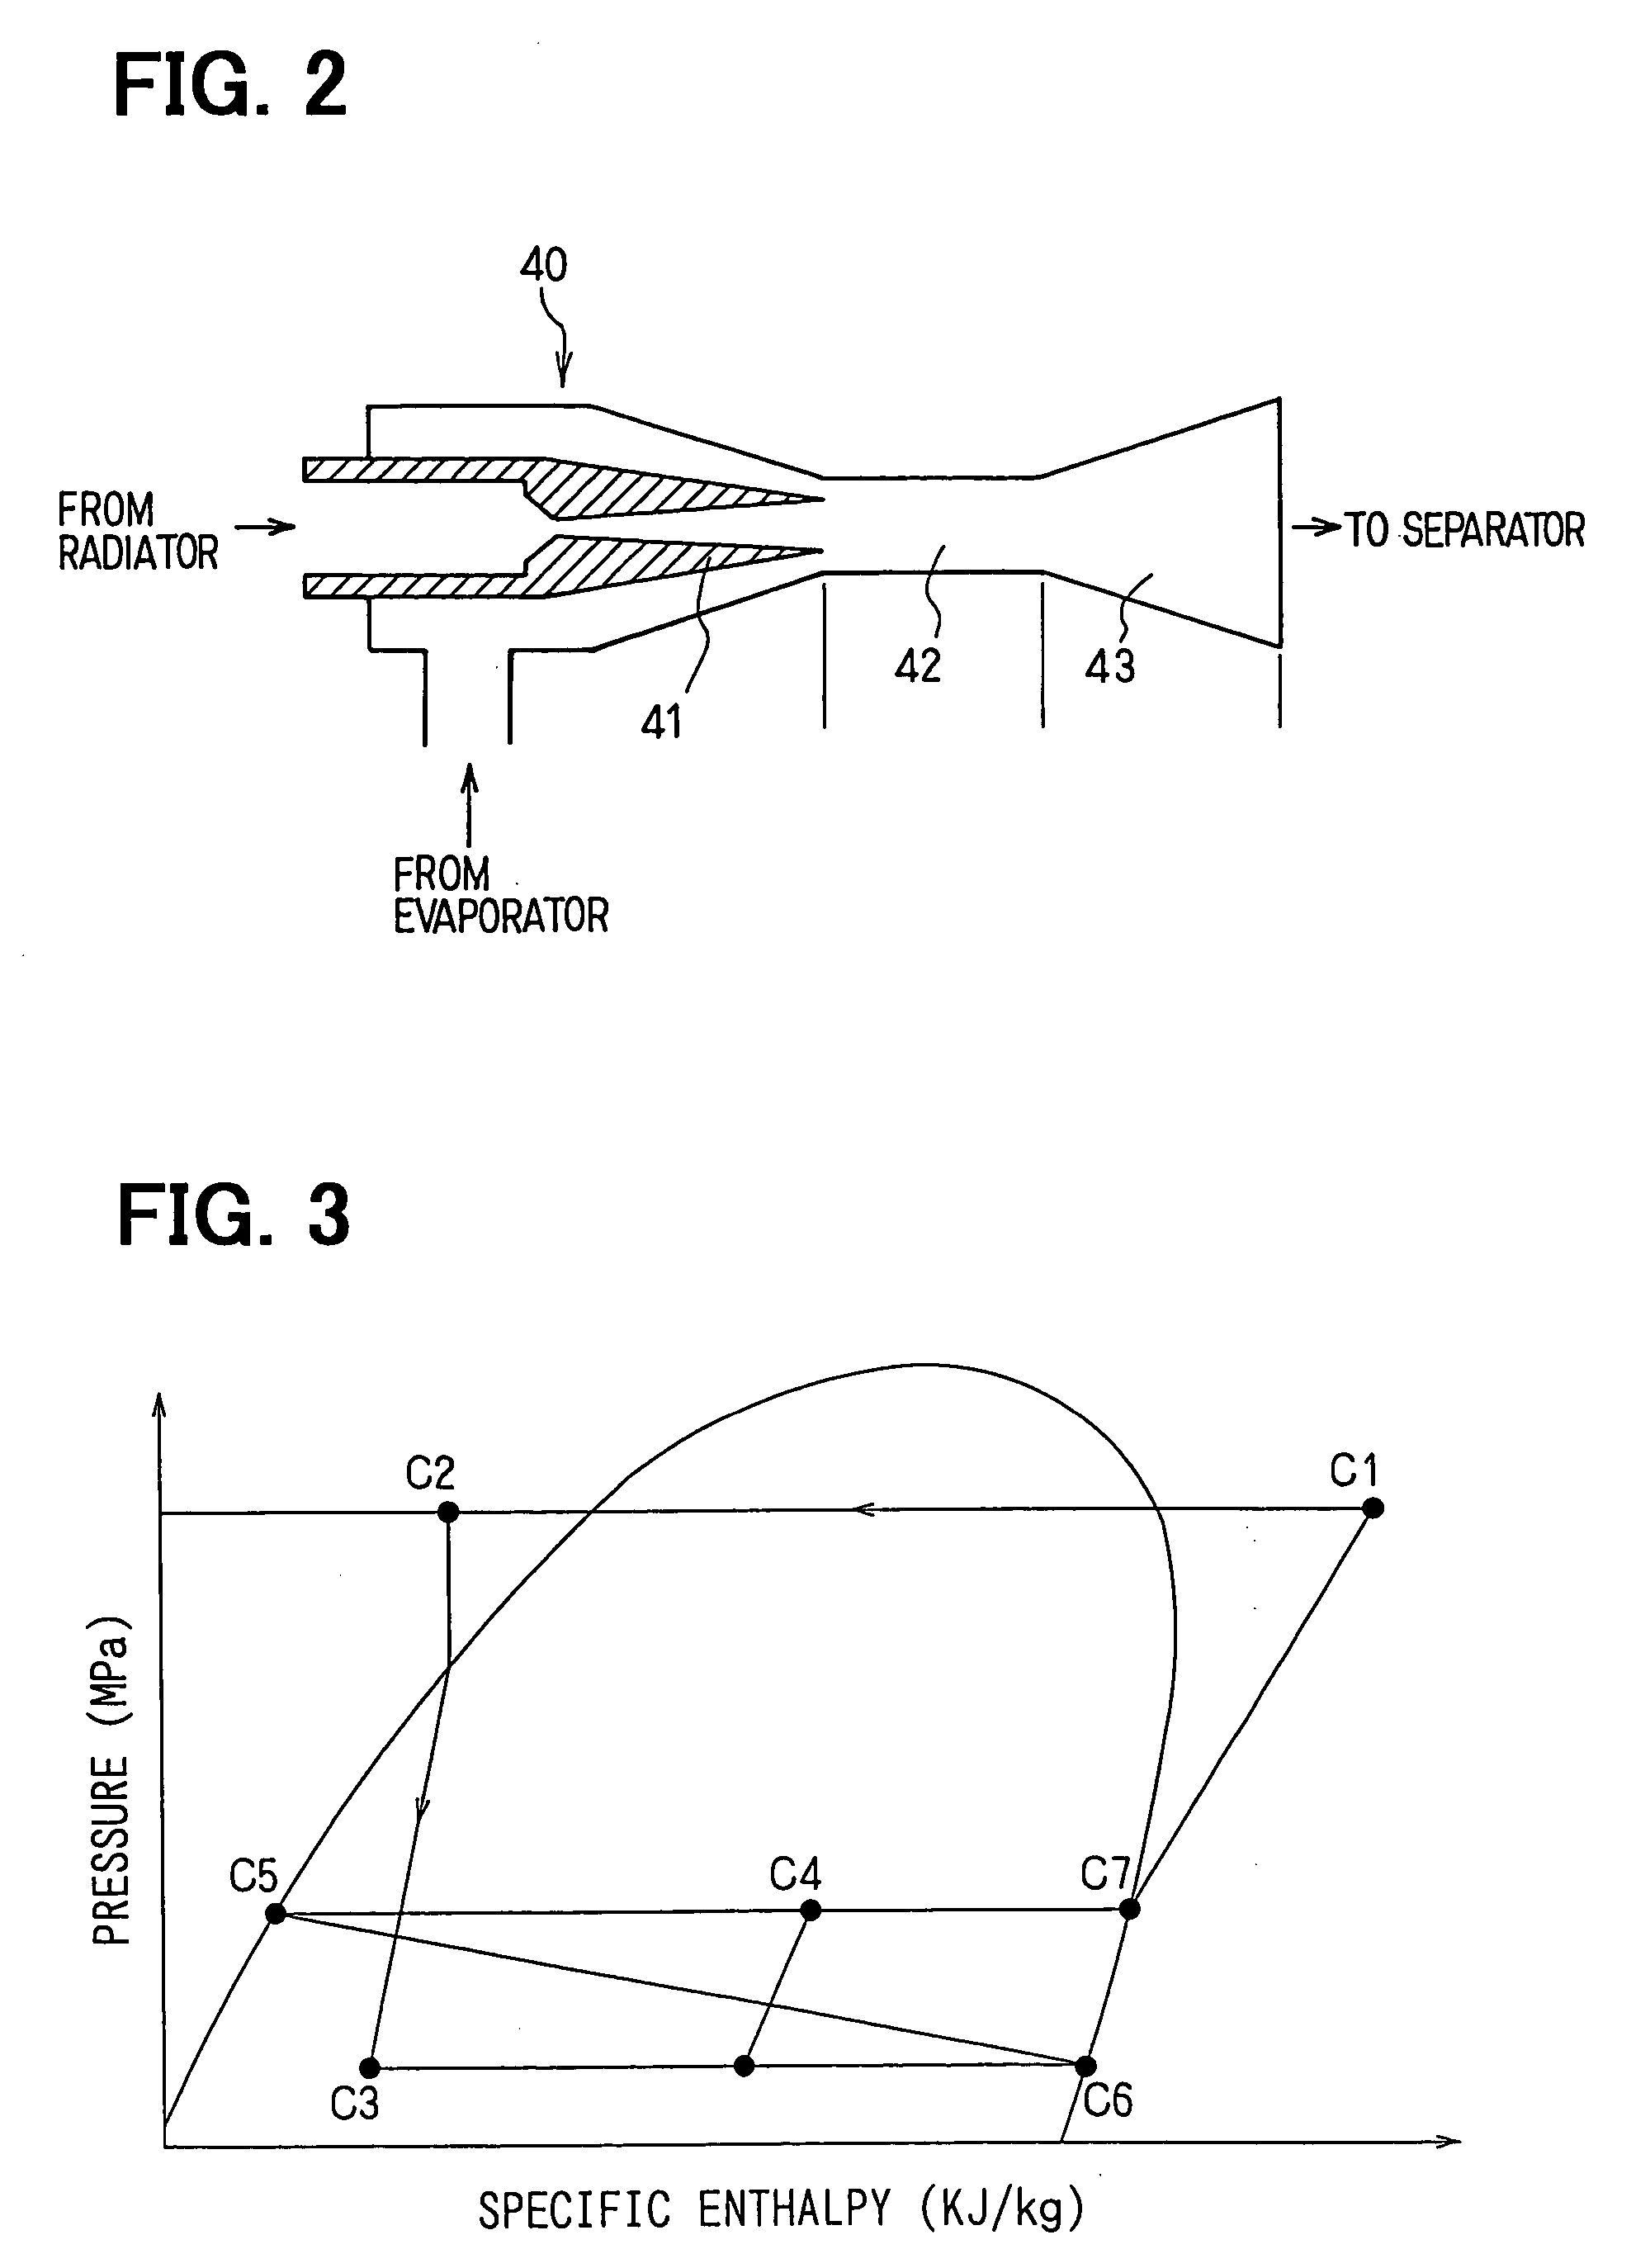 Vapor-compression refrigerant cycle with ejector